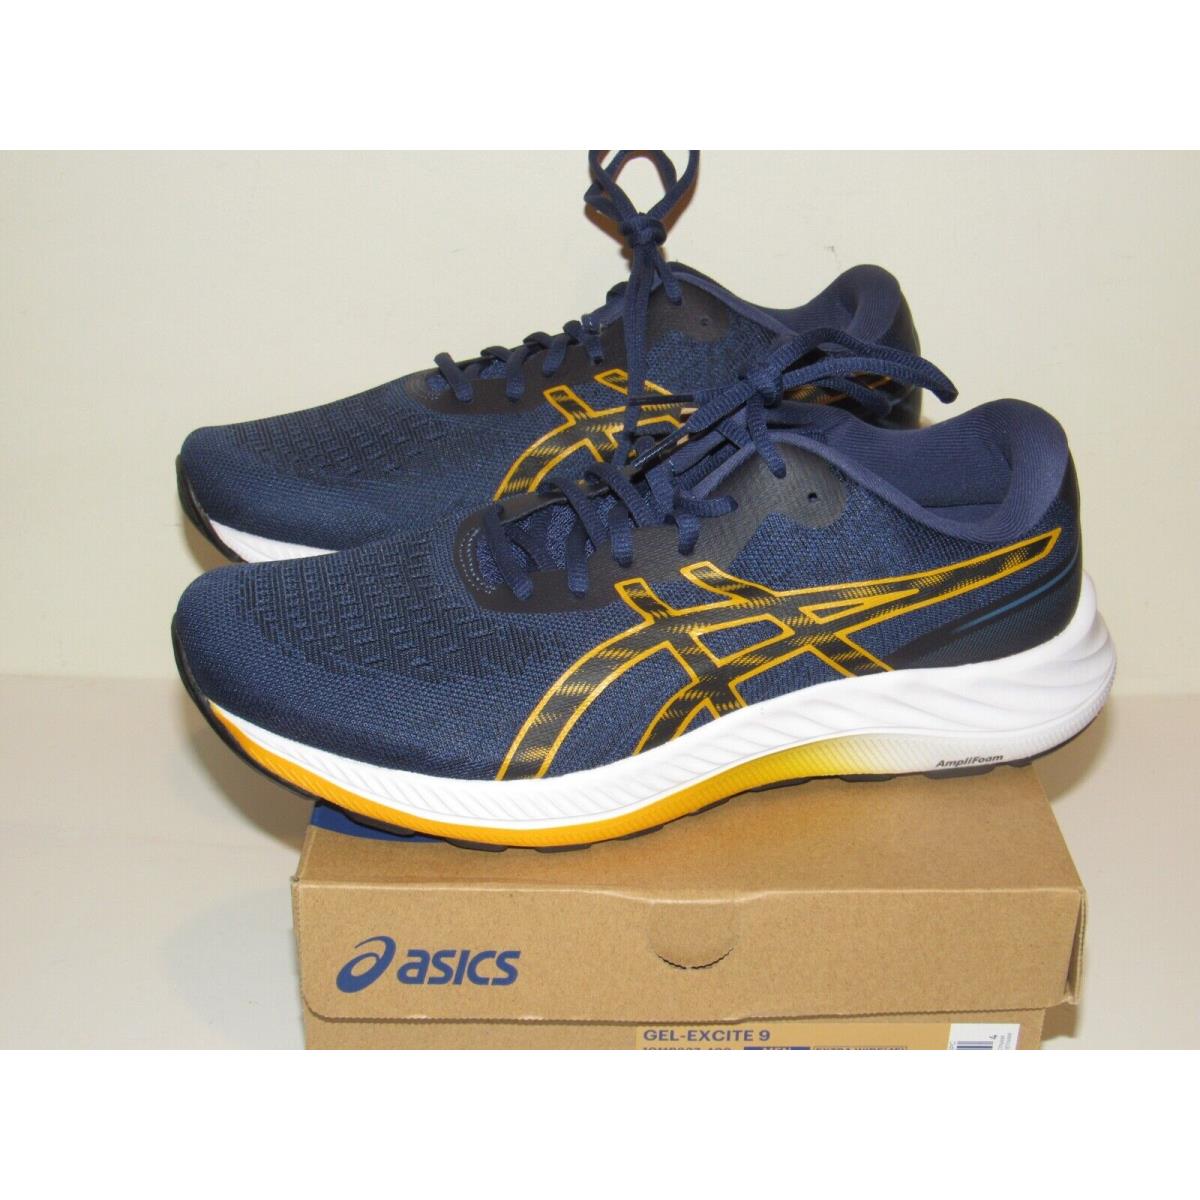 Asics Gel Excite 9 Mens Size 9 4E Extra Wide Running Shoes Sneakers Blue Yellow